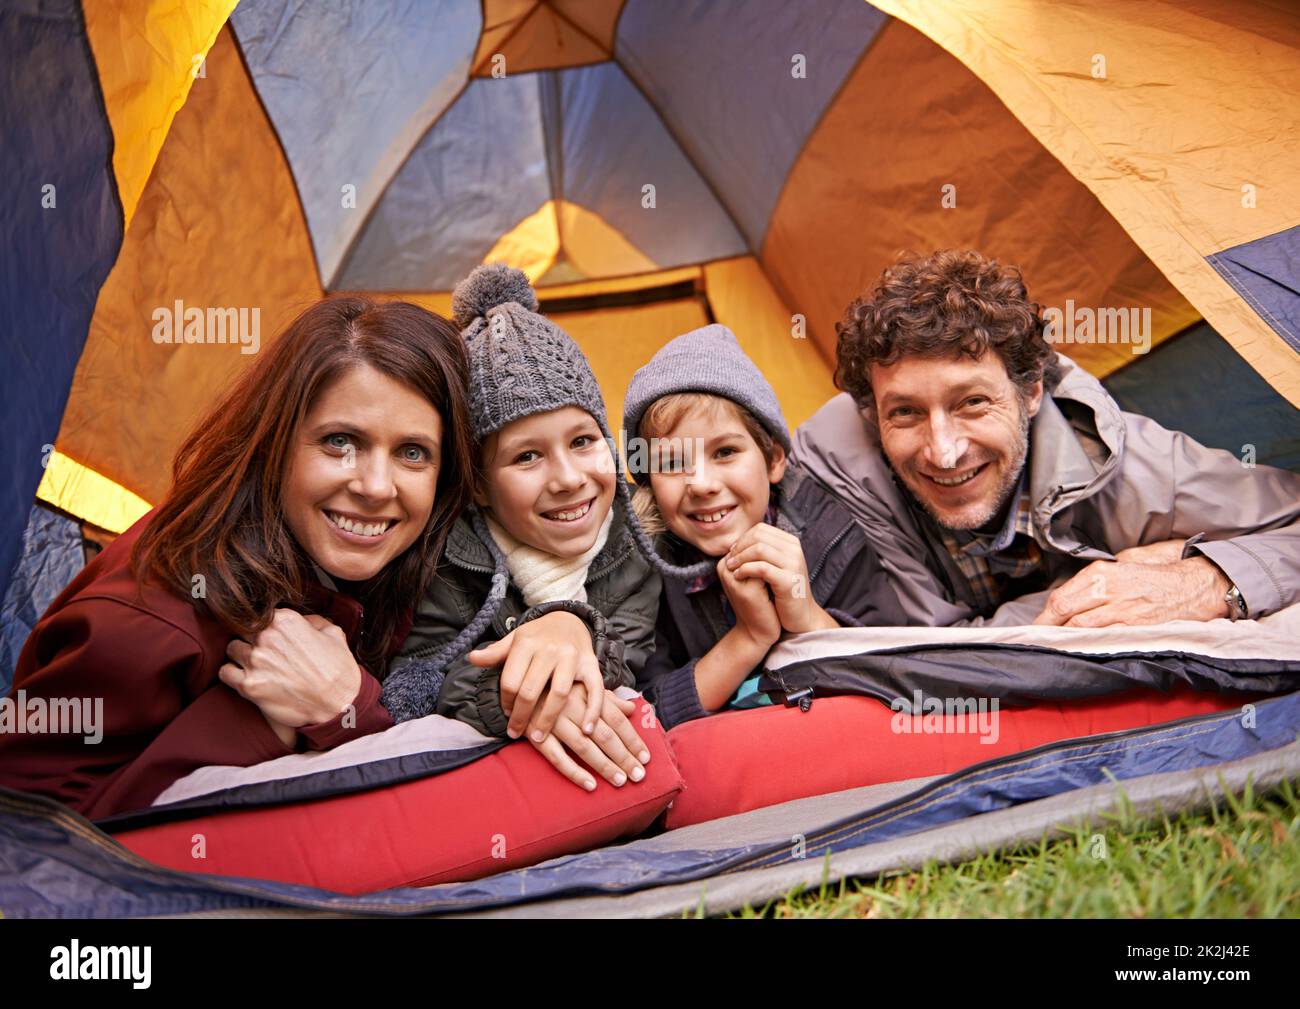 Family camping is family bonding. Portrait of smiling family of four relaxing in tent on a camping holiday. Stock Photo